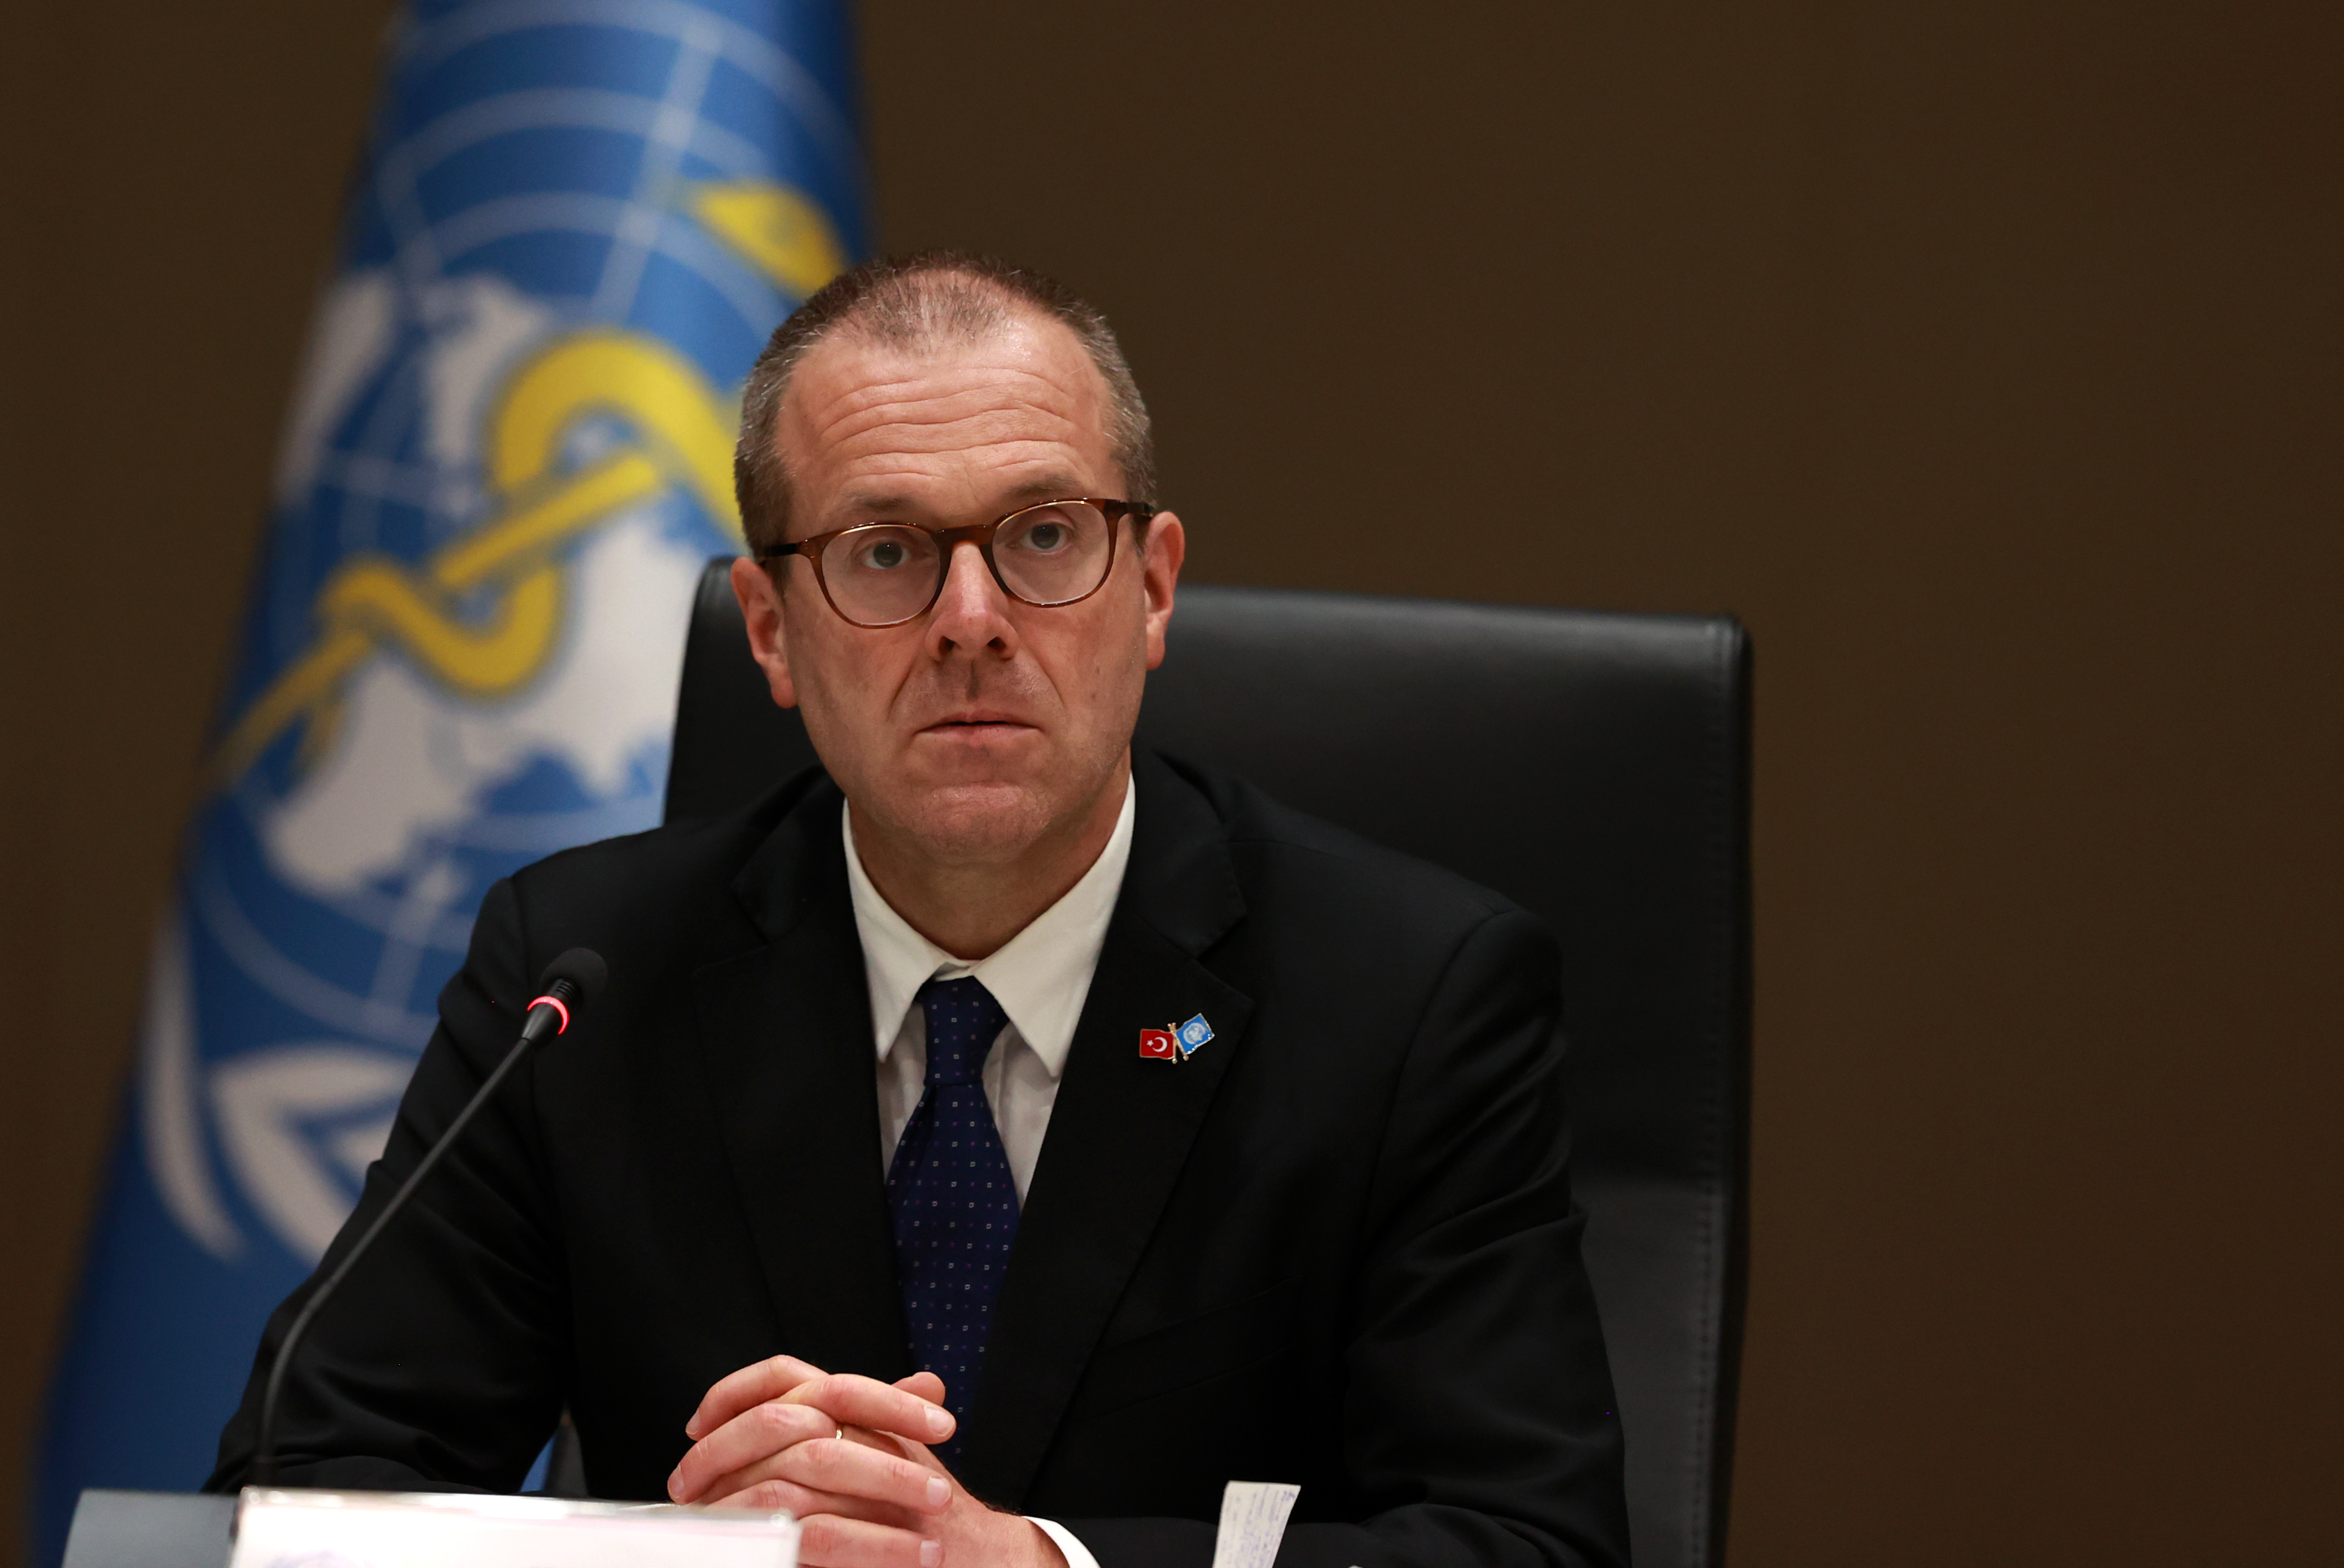 World Health Organization (WHO) Regional Director for Europe Dr. Hans Kluge at a meeting in Ankara, Turkey, in July 2020.